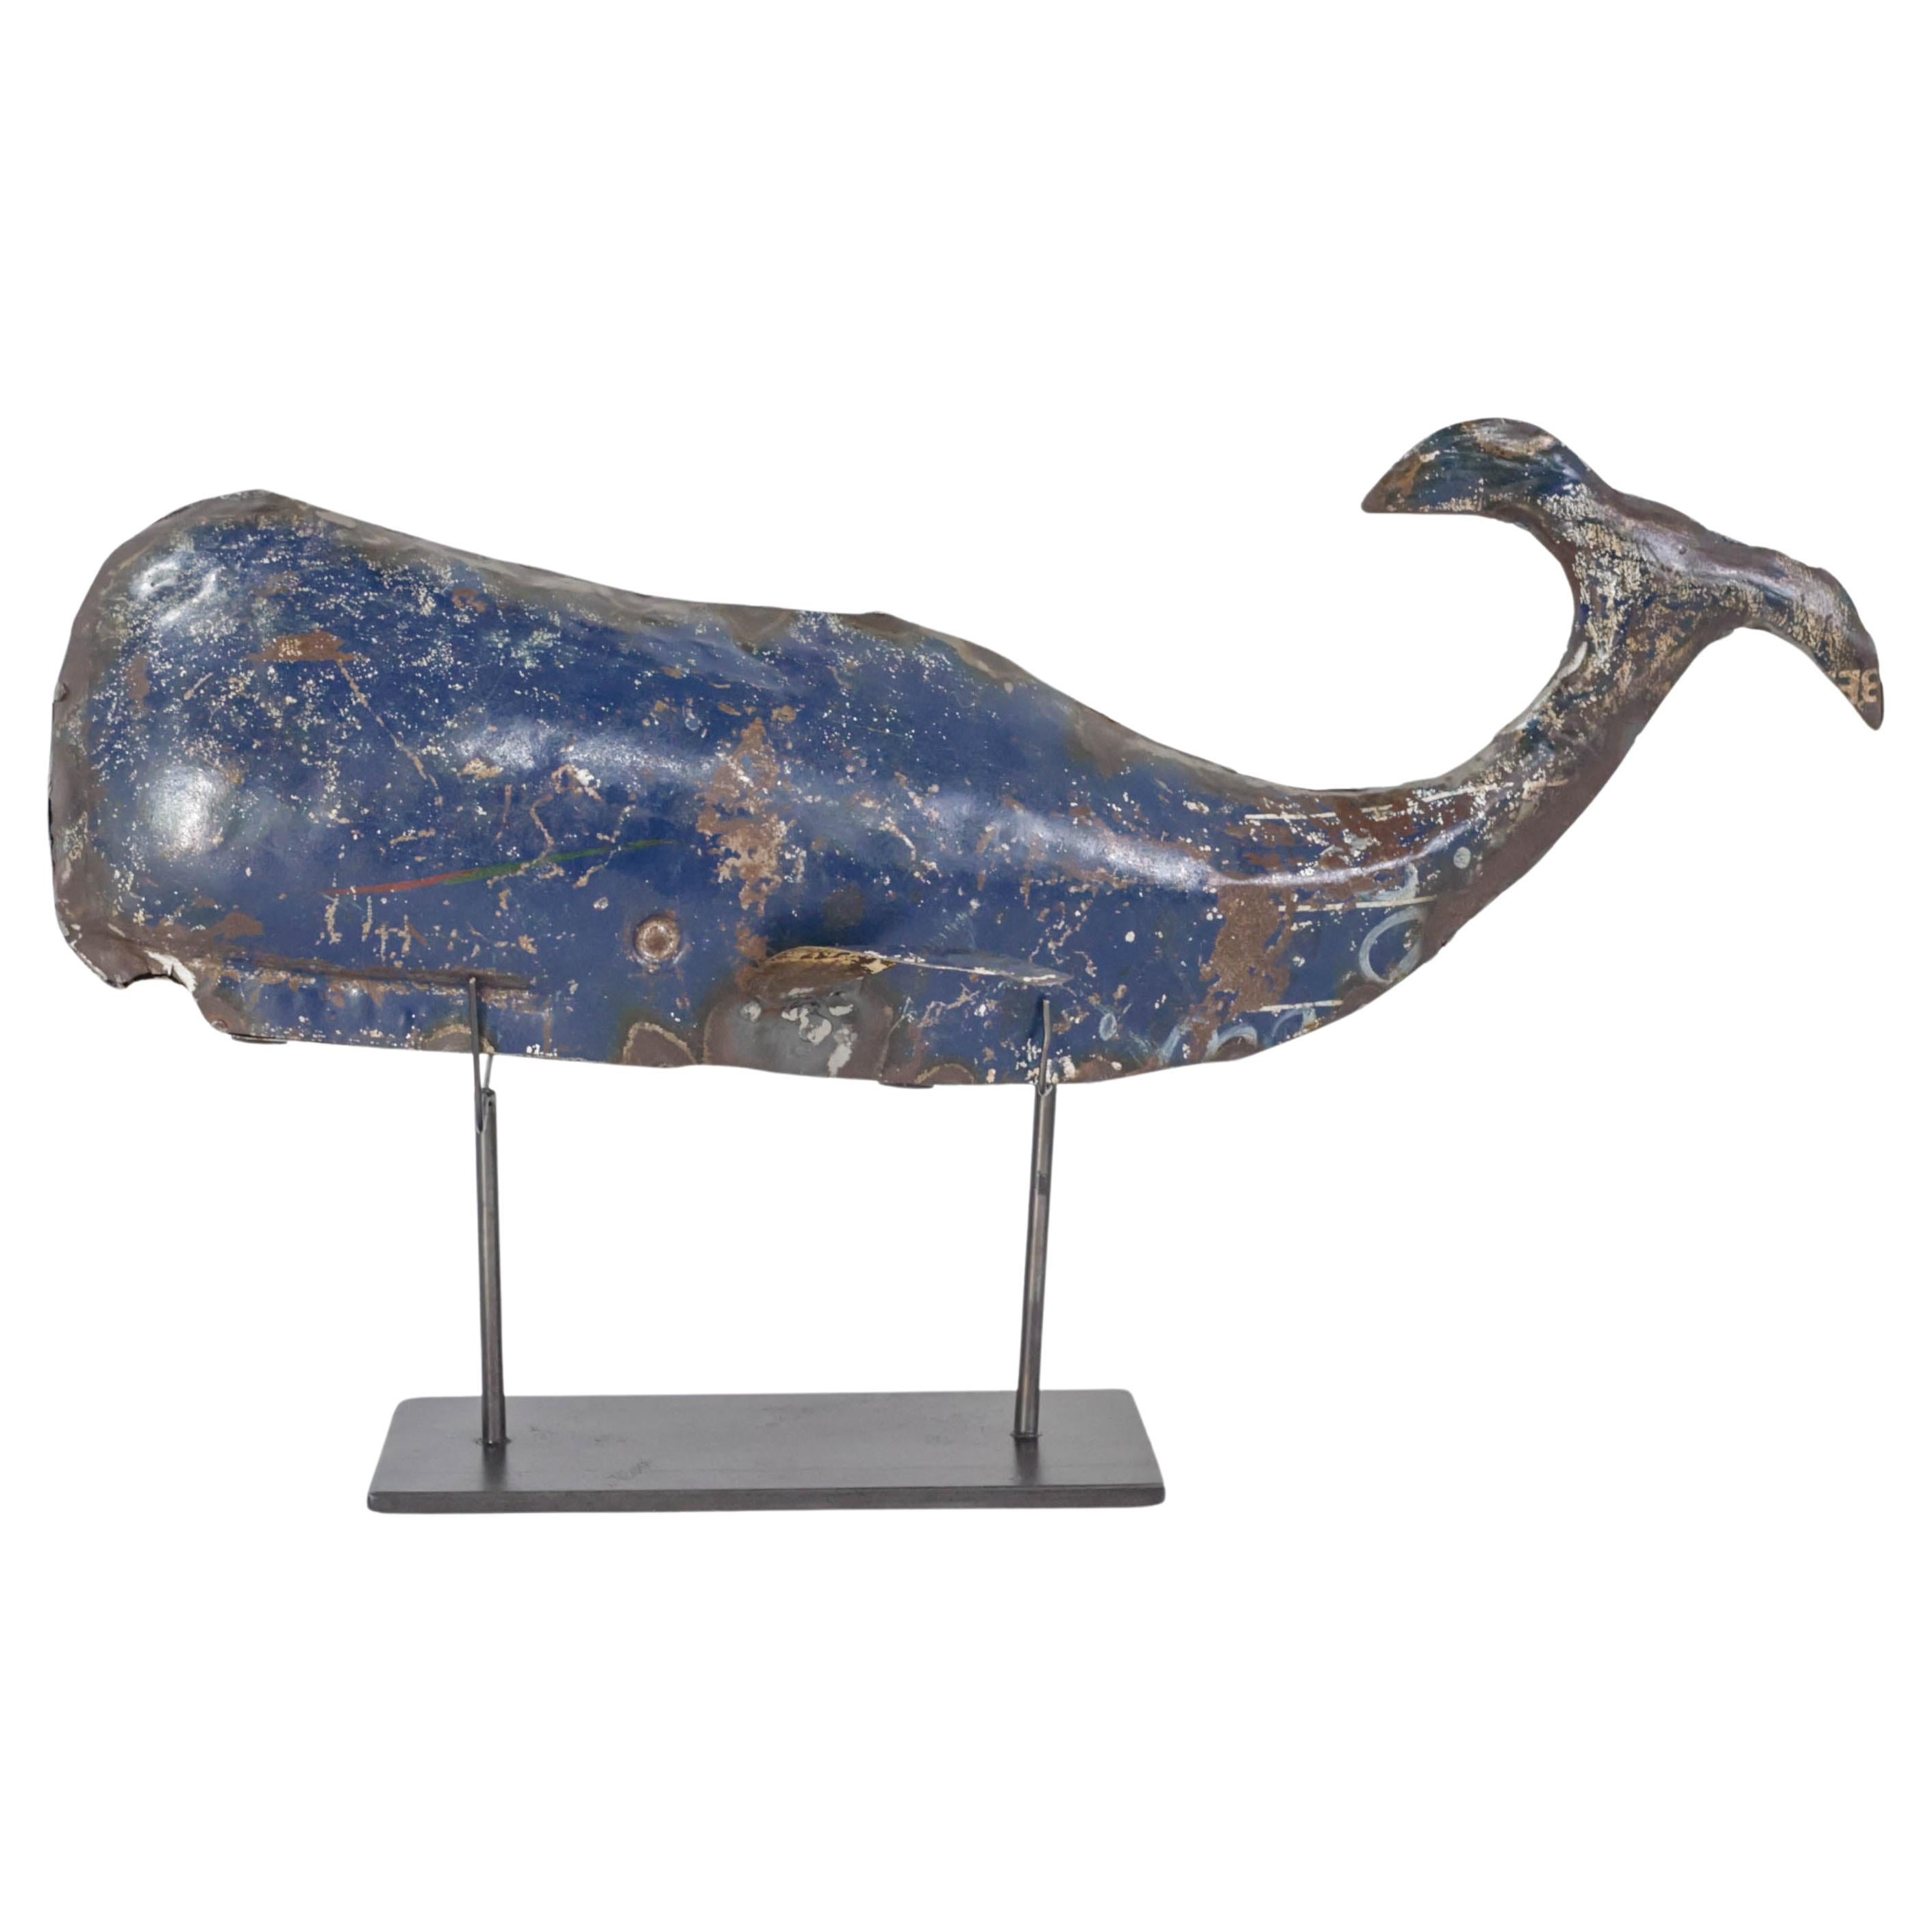 Midcentury Whale Sculpture on Stand, Circa 1960s For Sale